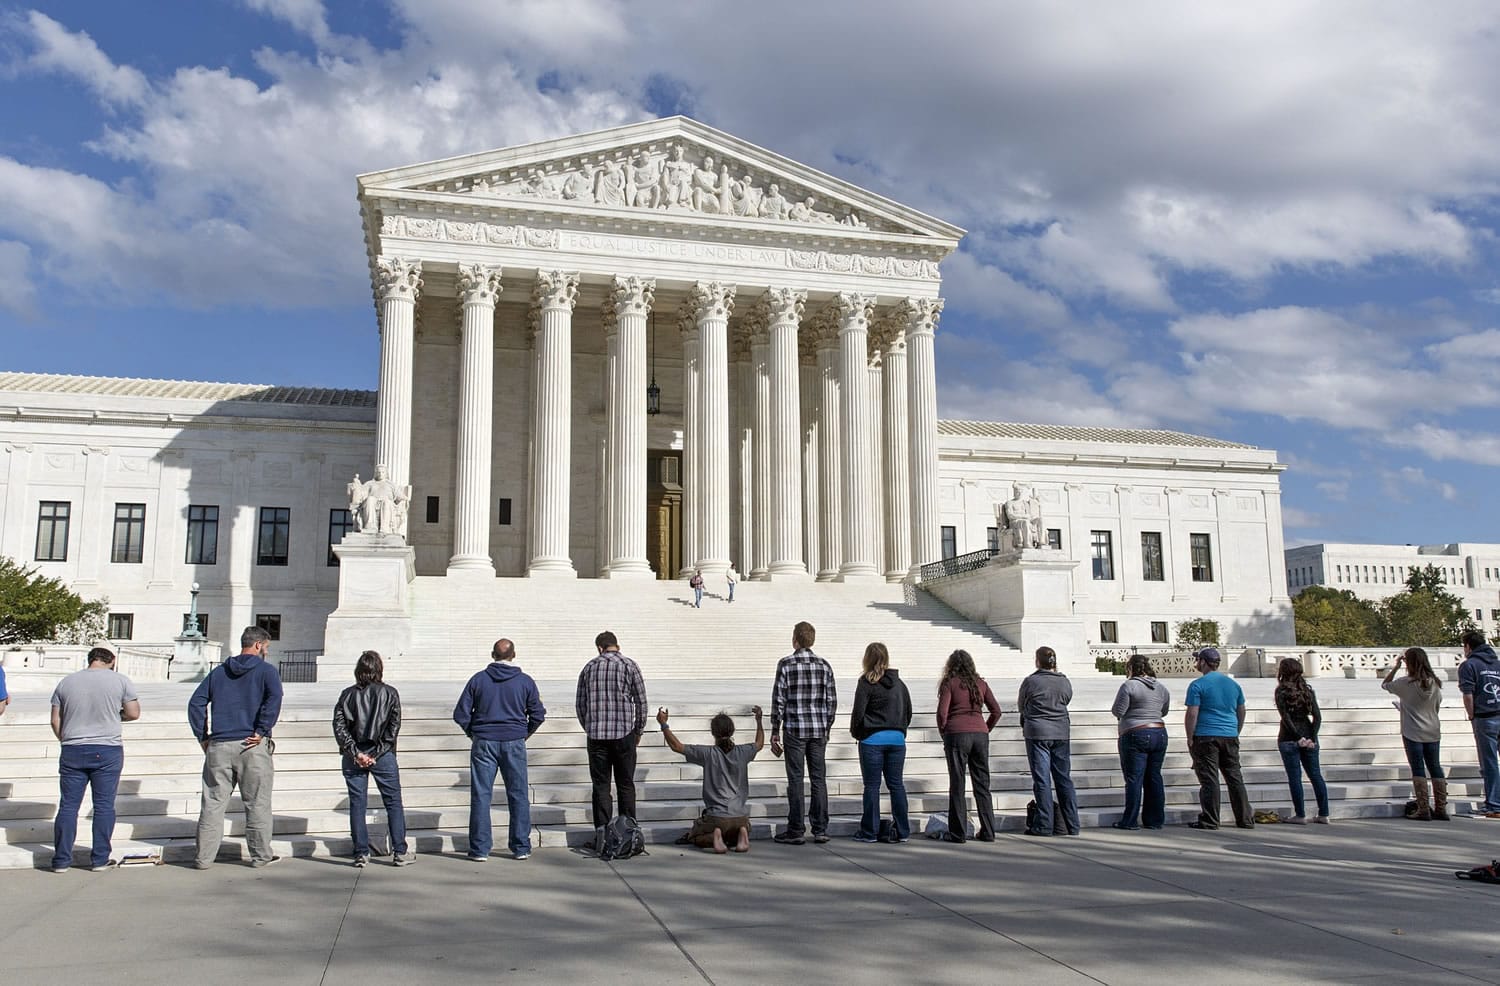 As the Supreme Court begins its new term this week, pro-life advocates hold a prayer vigil on the plaza of the high court in Washington on Saturday.